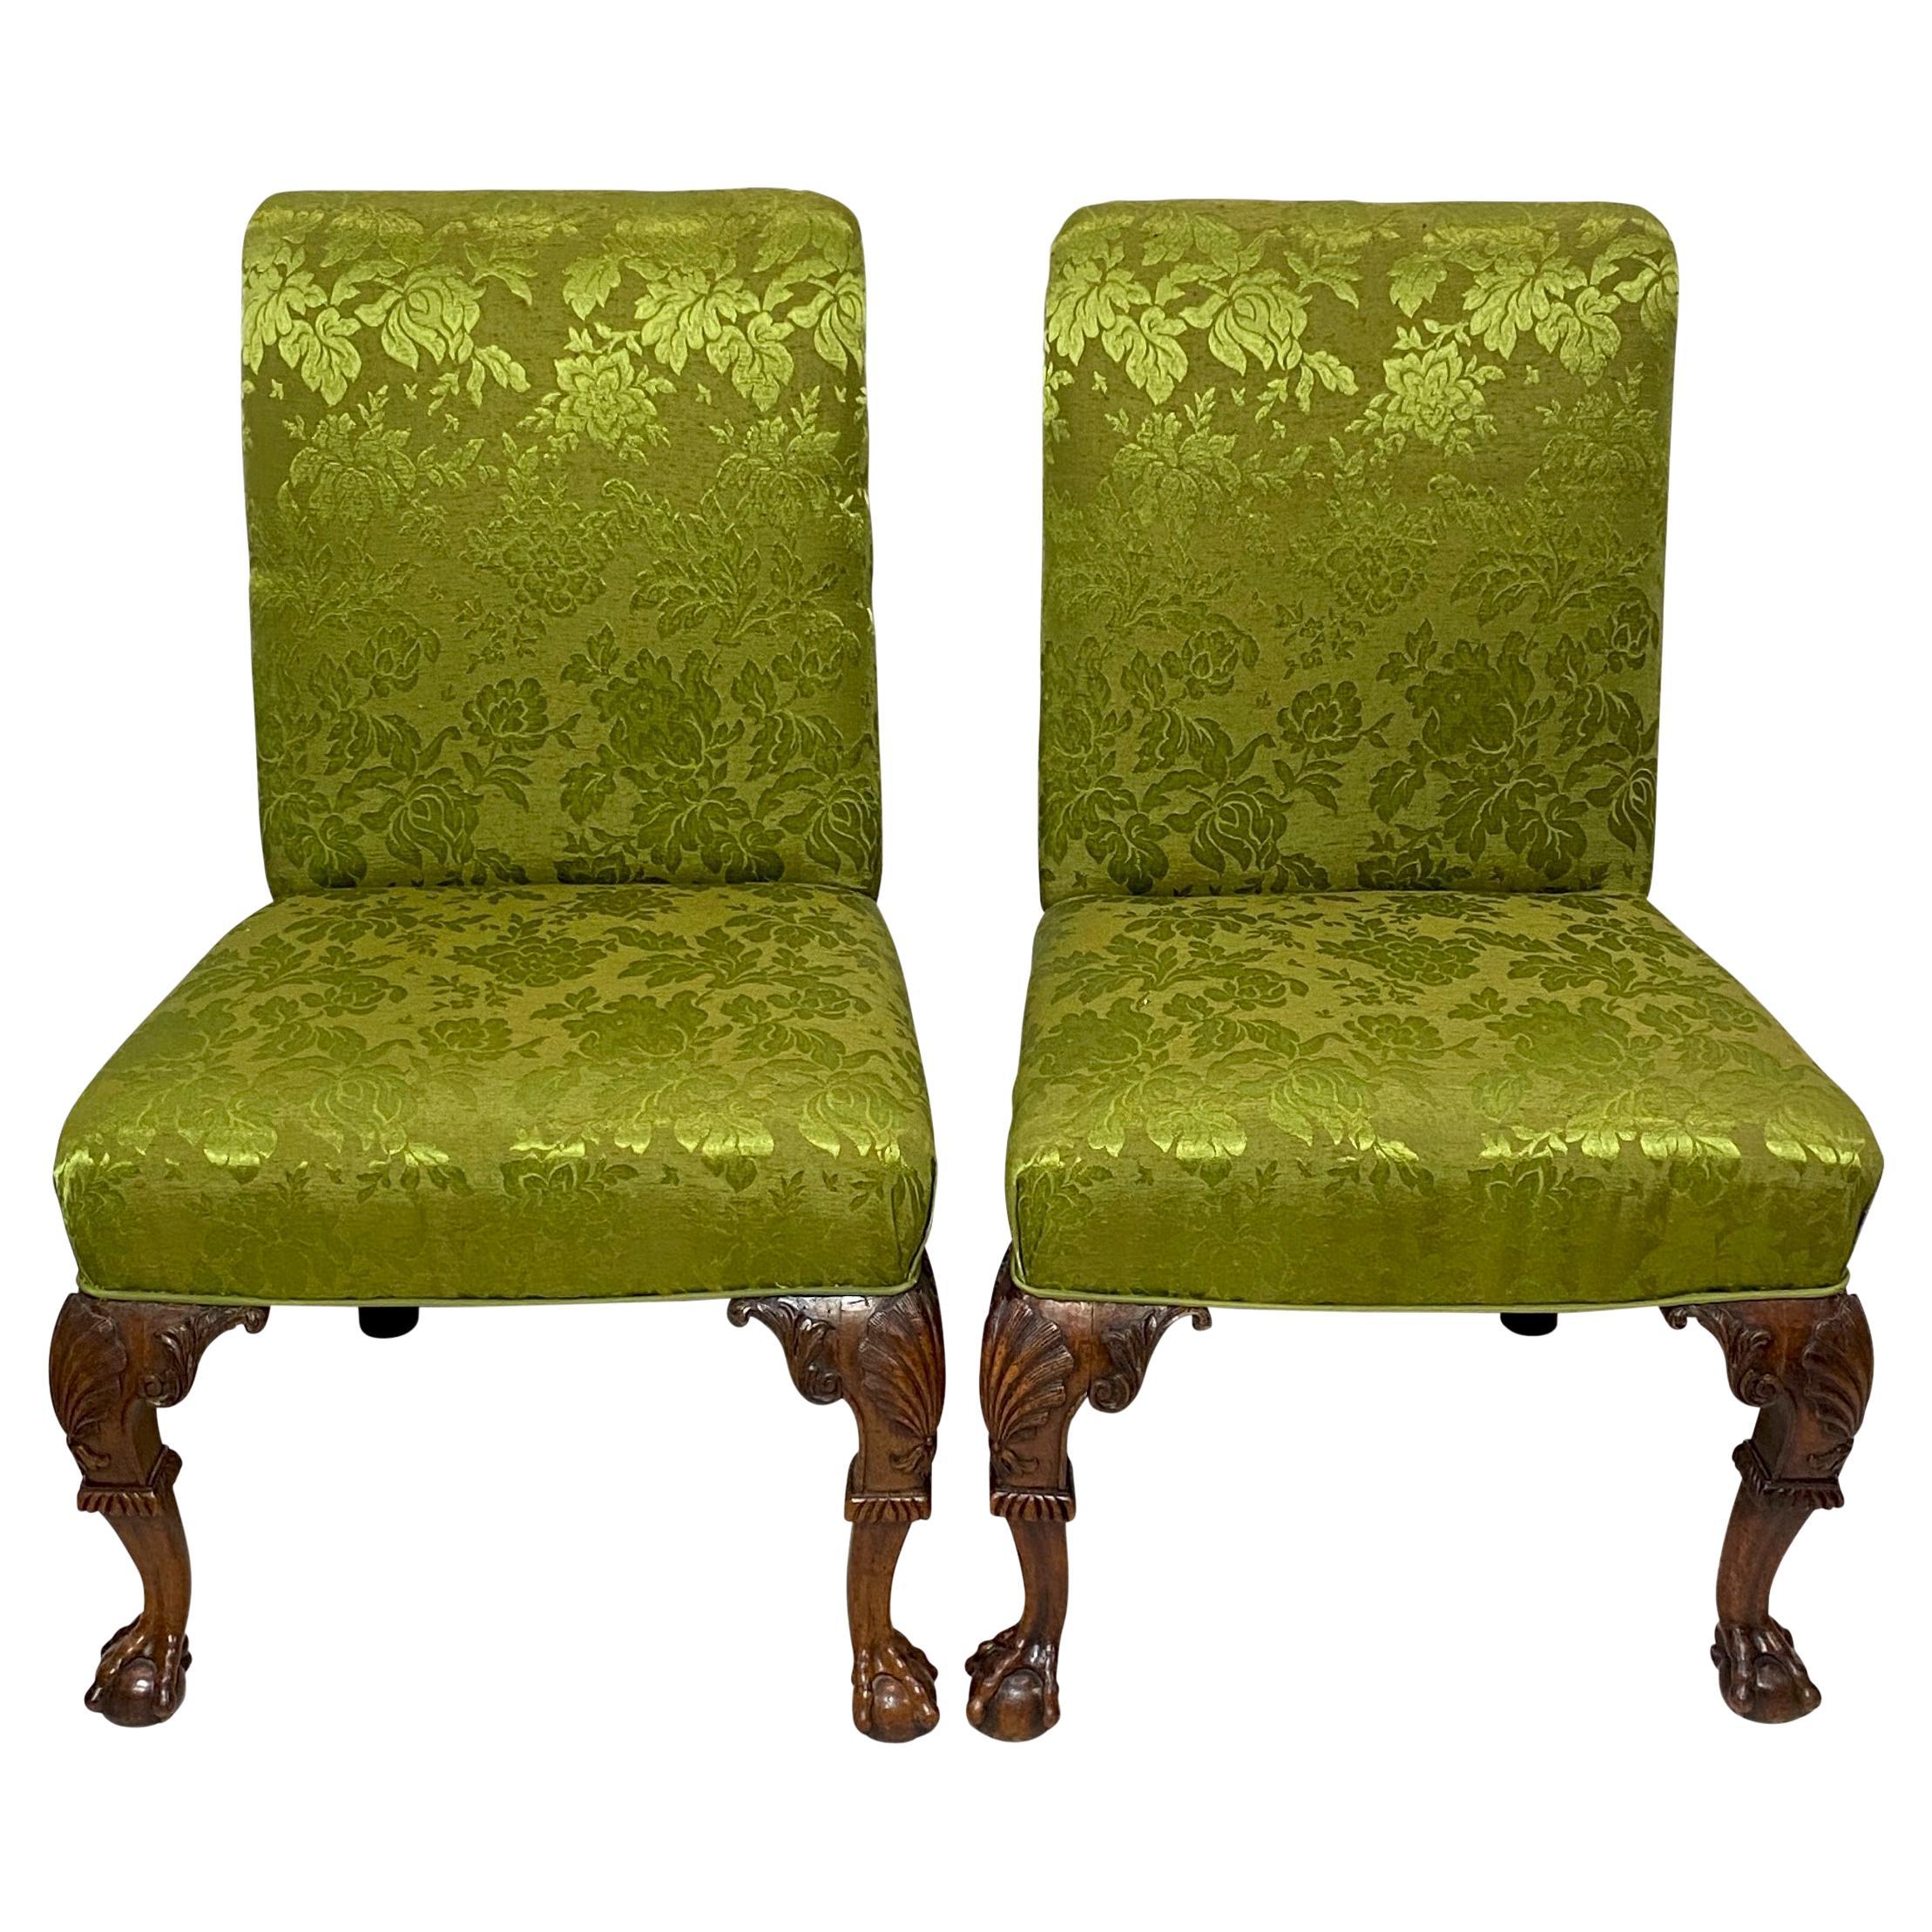 Pair of Exceptional 18th Century English Chippendale Mahogany Side Chairs